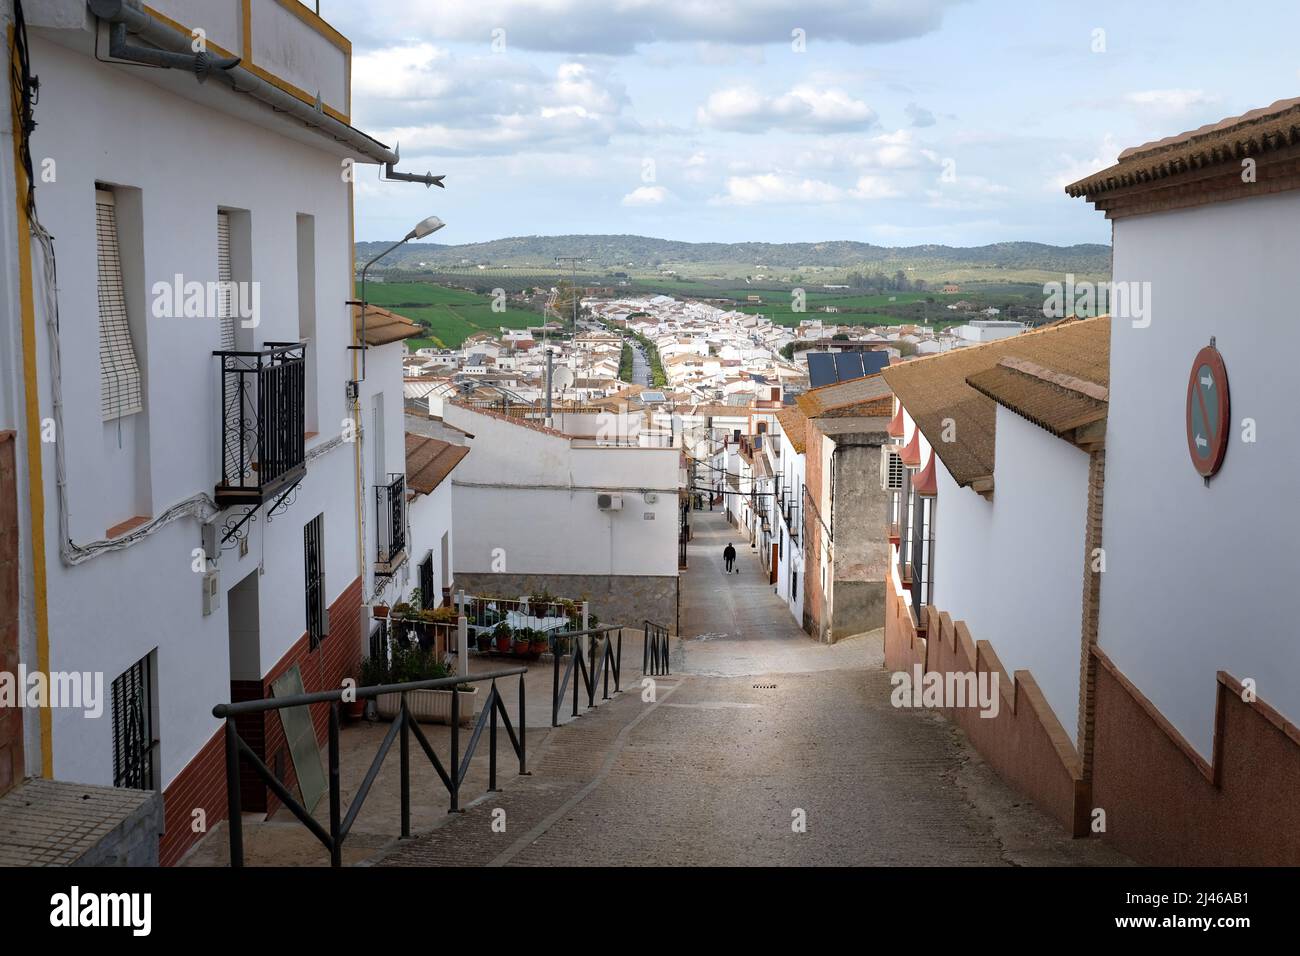 View down one of the steep streets in La Puebla de los Infantes, Seville, Andalucia, Spain Stock Photo